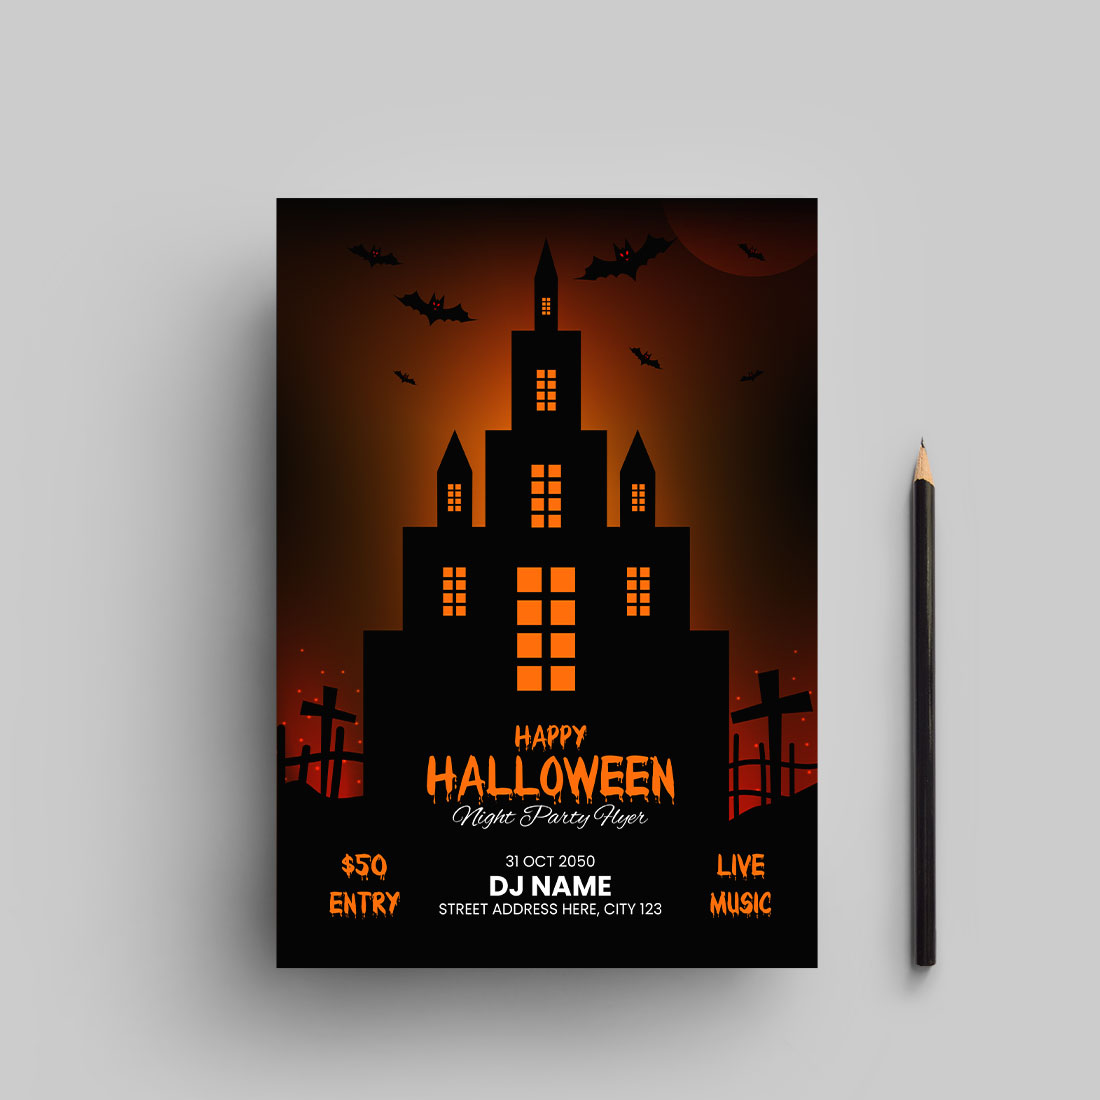 Halloween party flyer design template cover image.